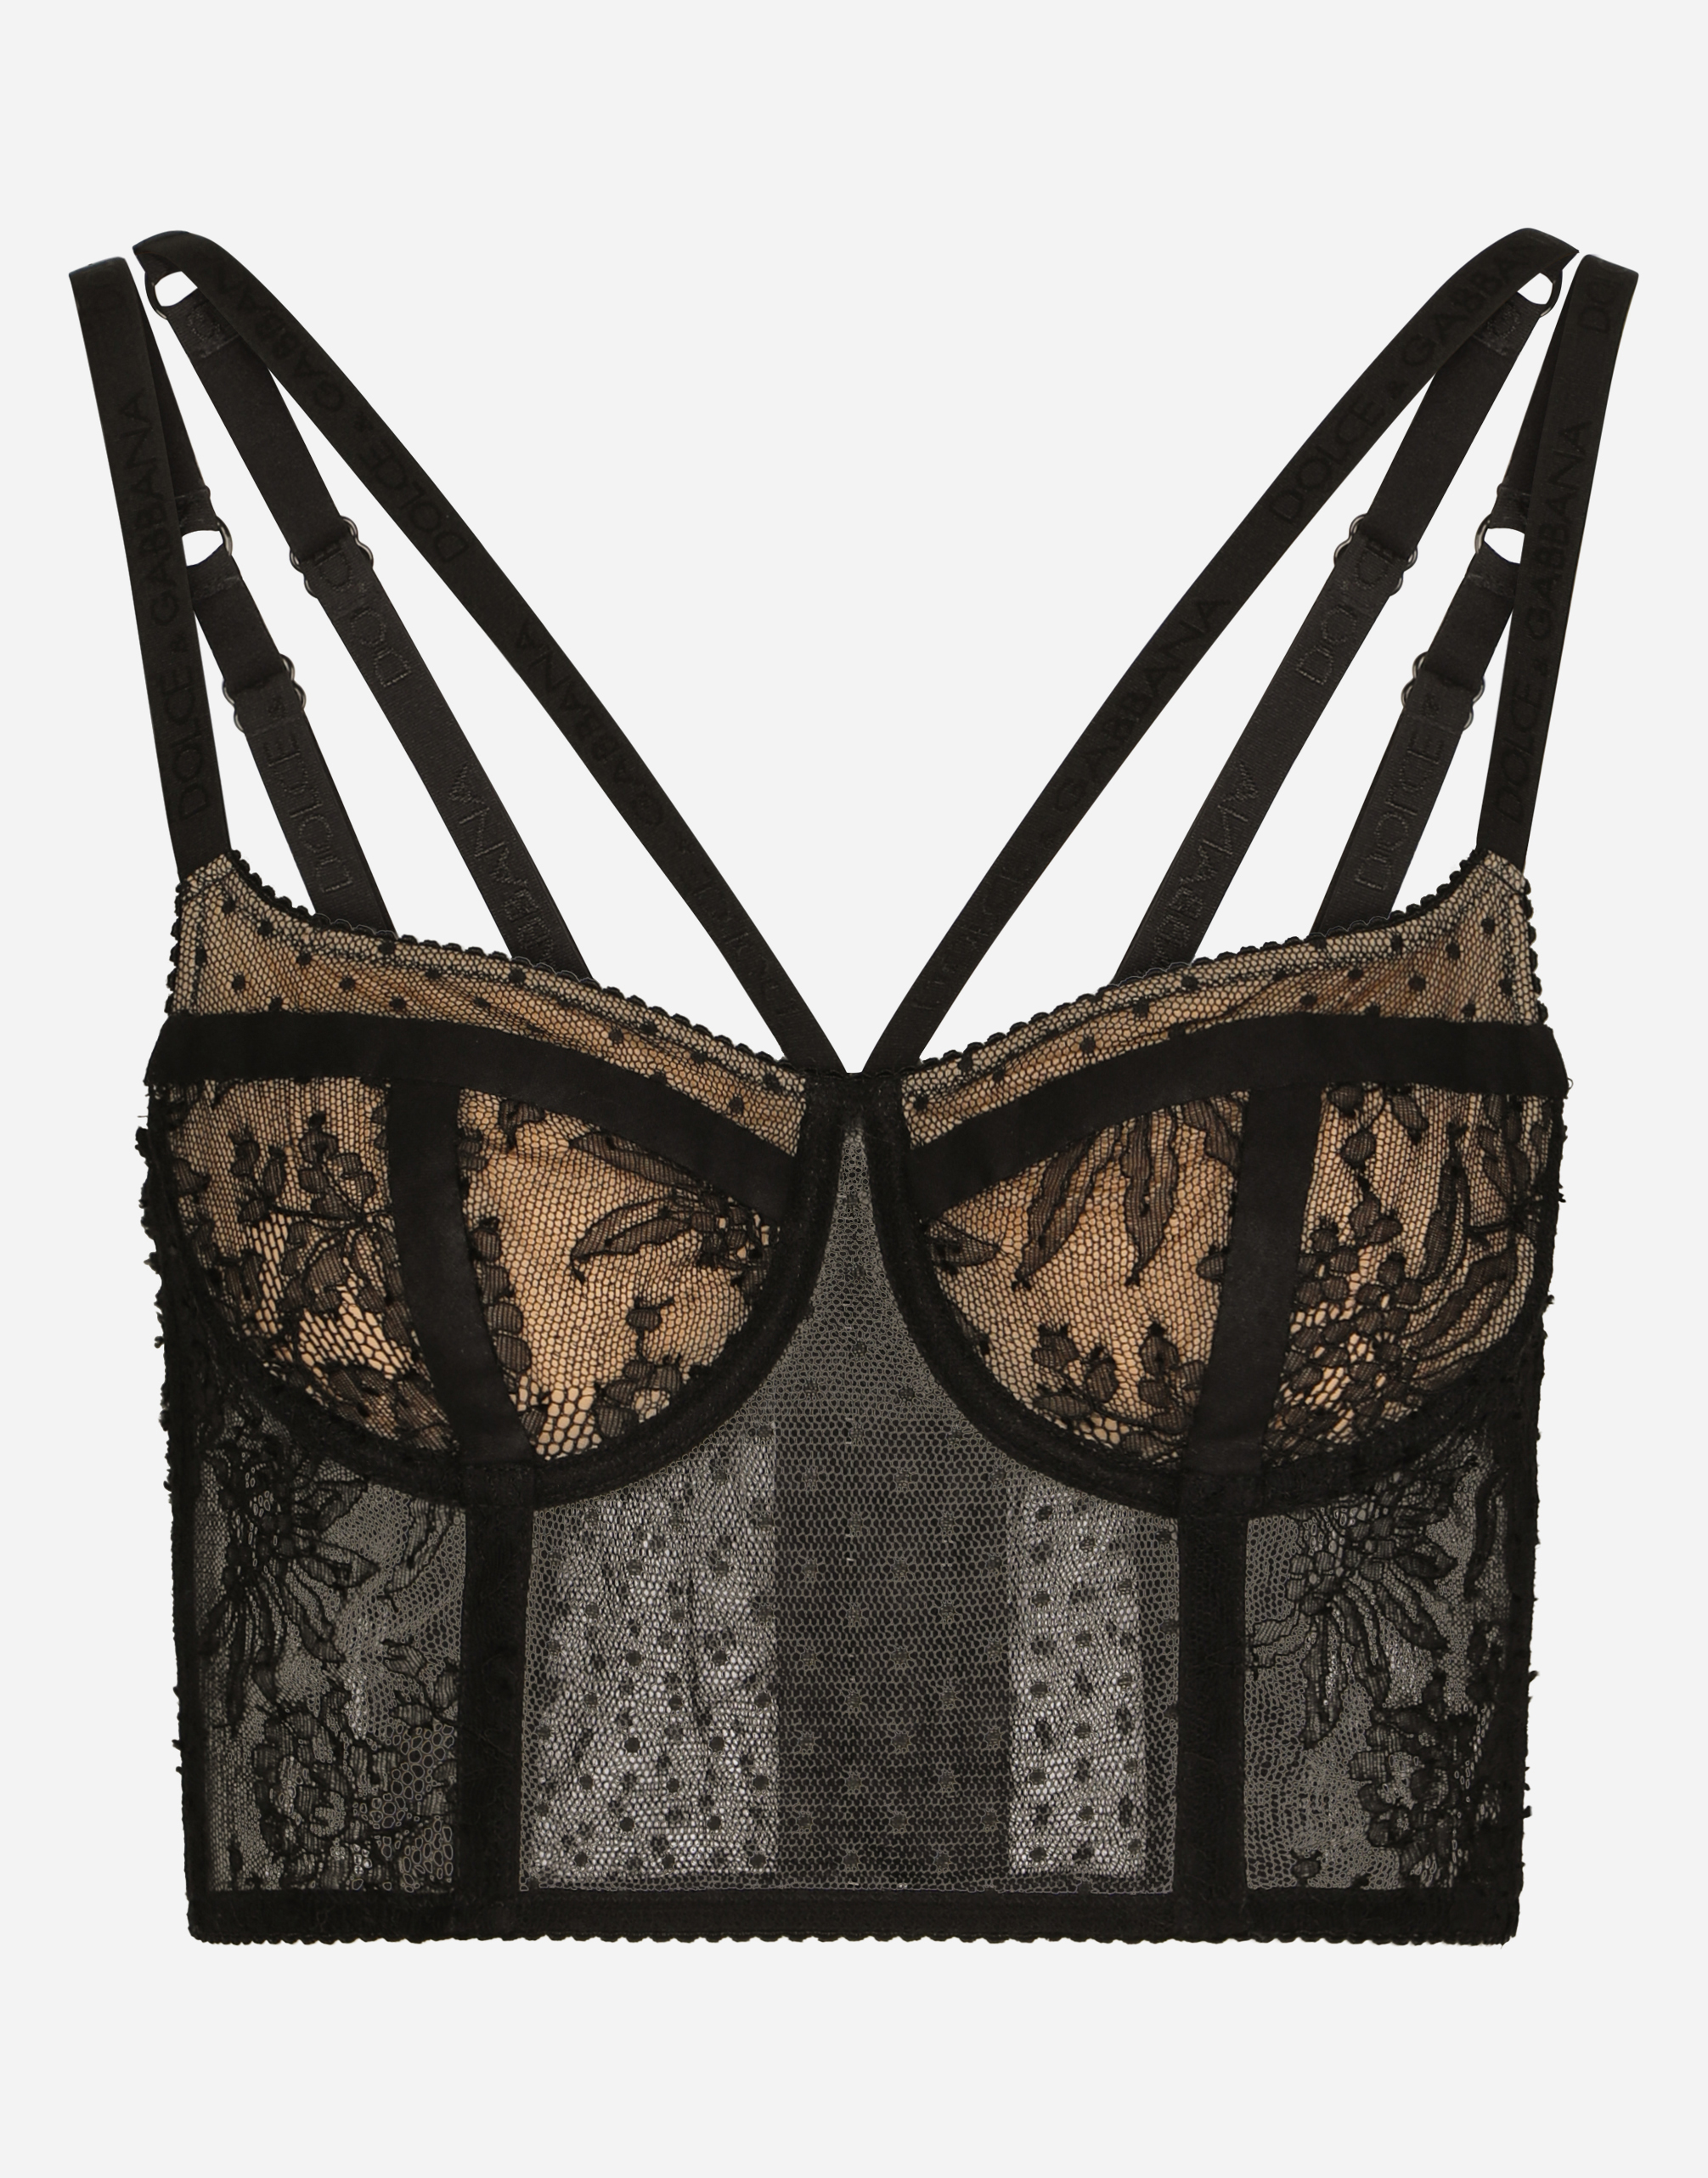 Lace lingerie bustier with straps in Black